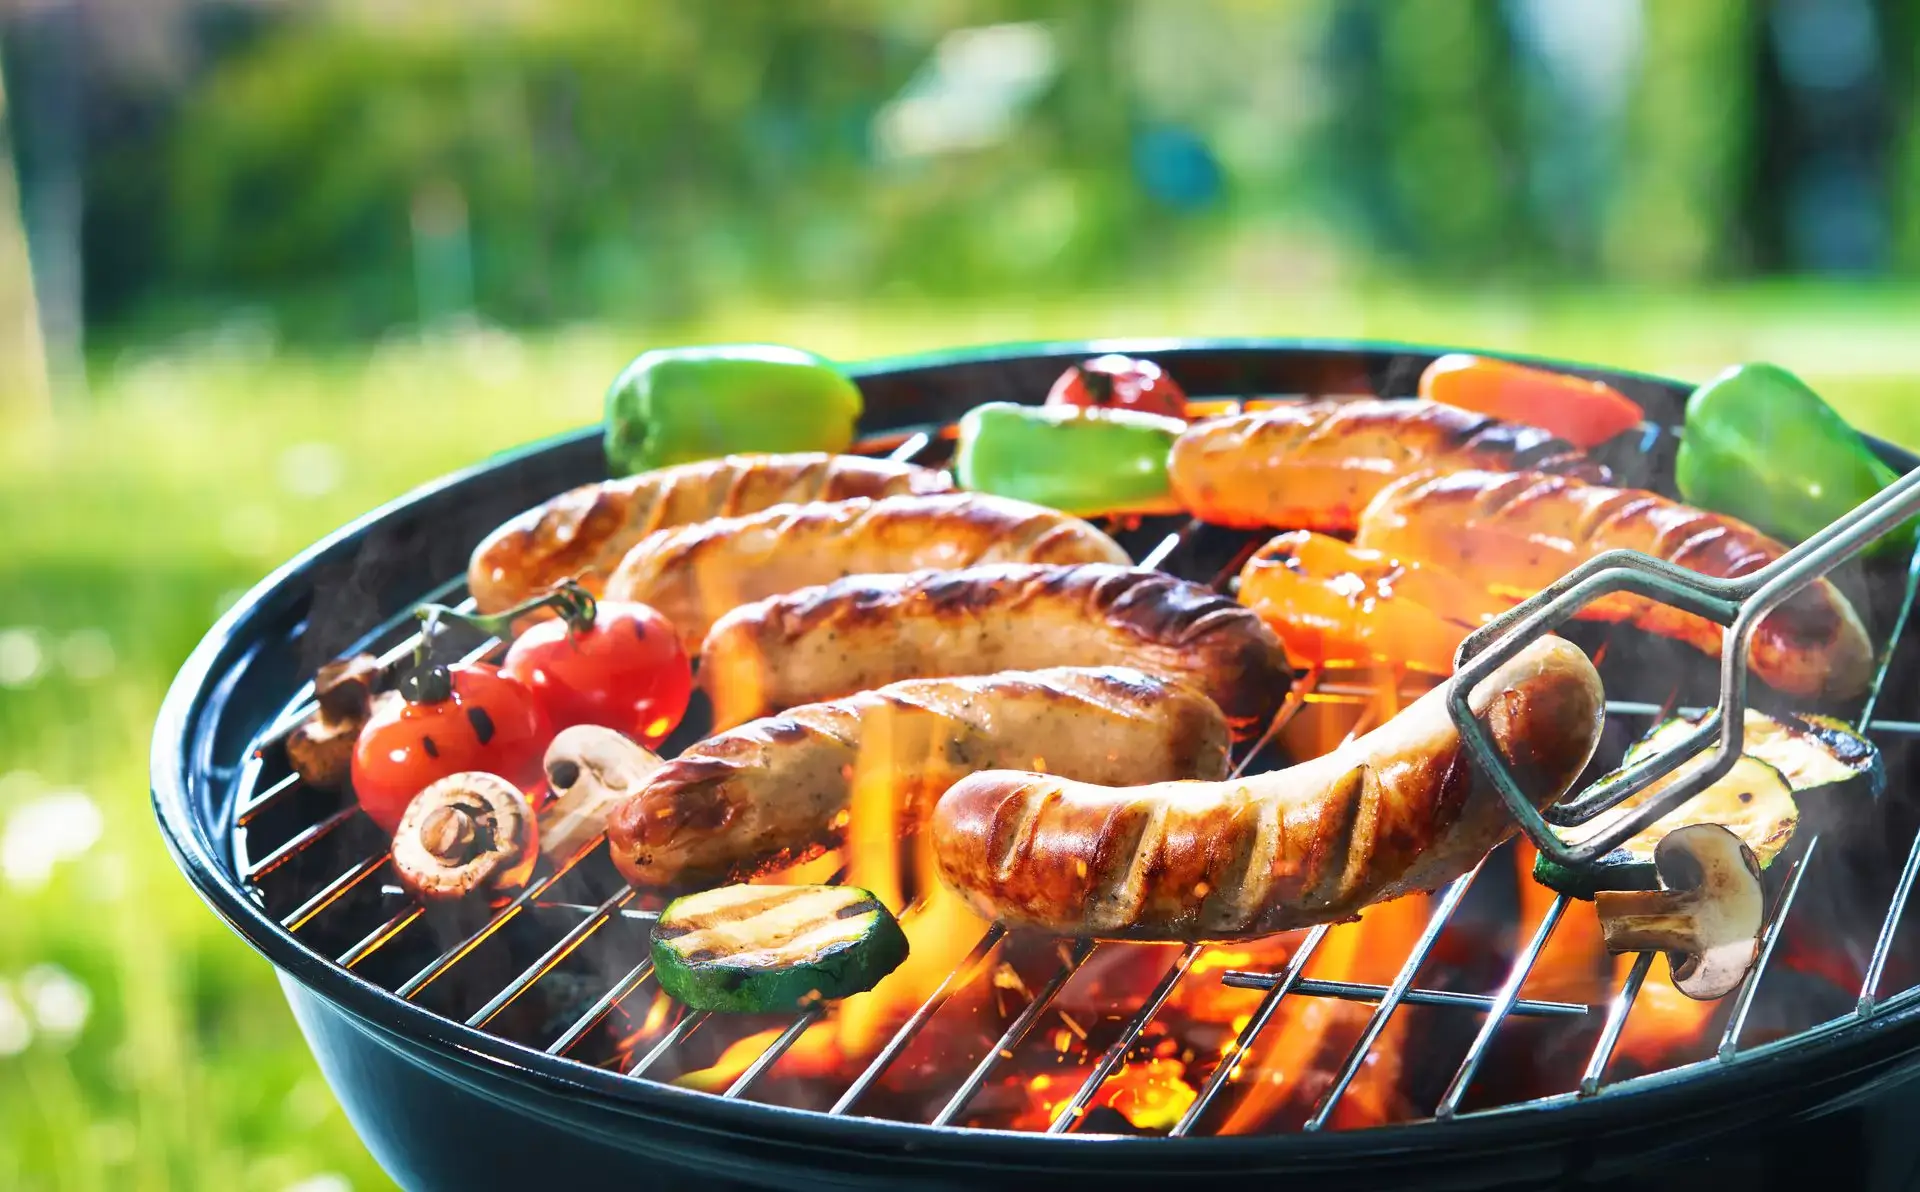 Grilled sausages &#8211; what type should you choose and how should you prepare it? 